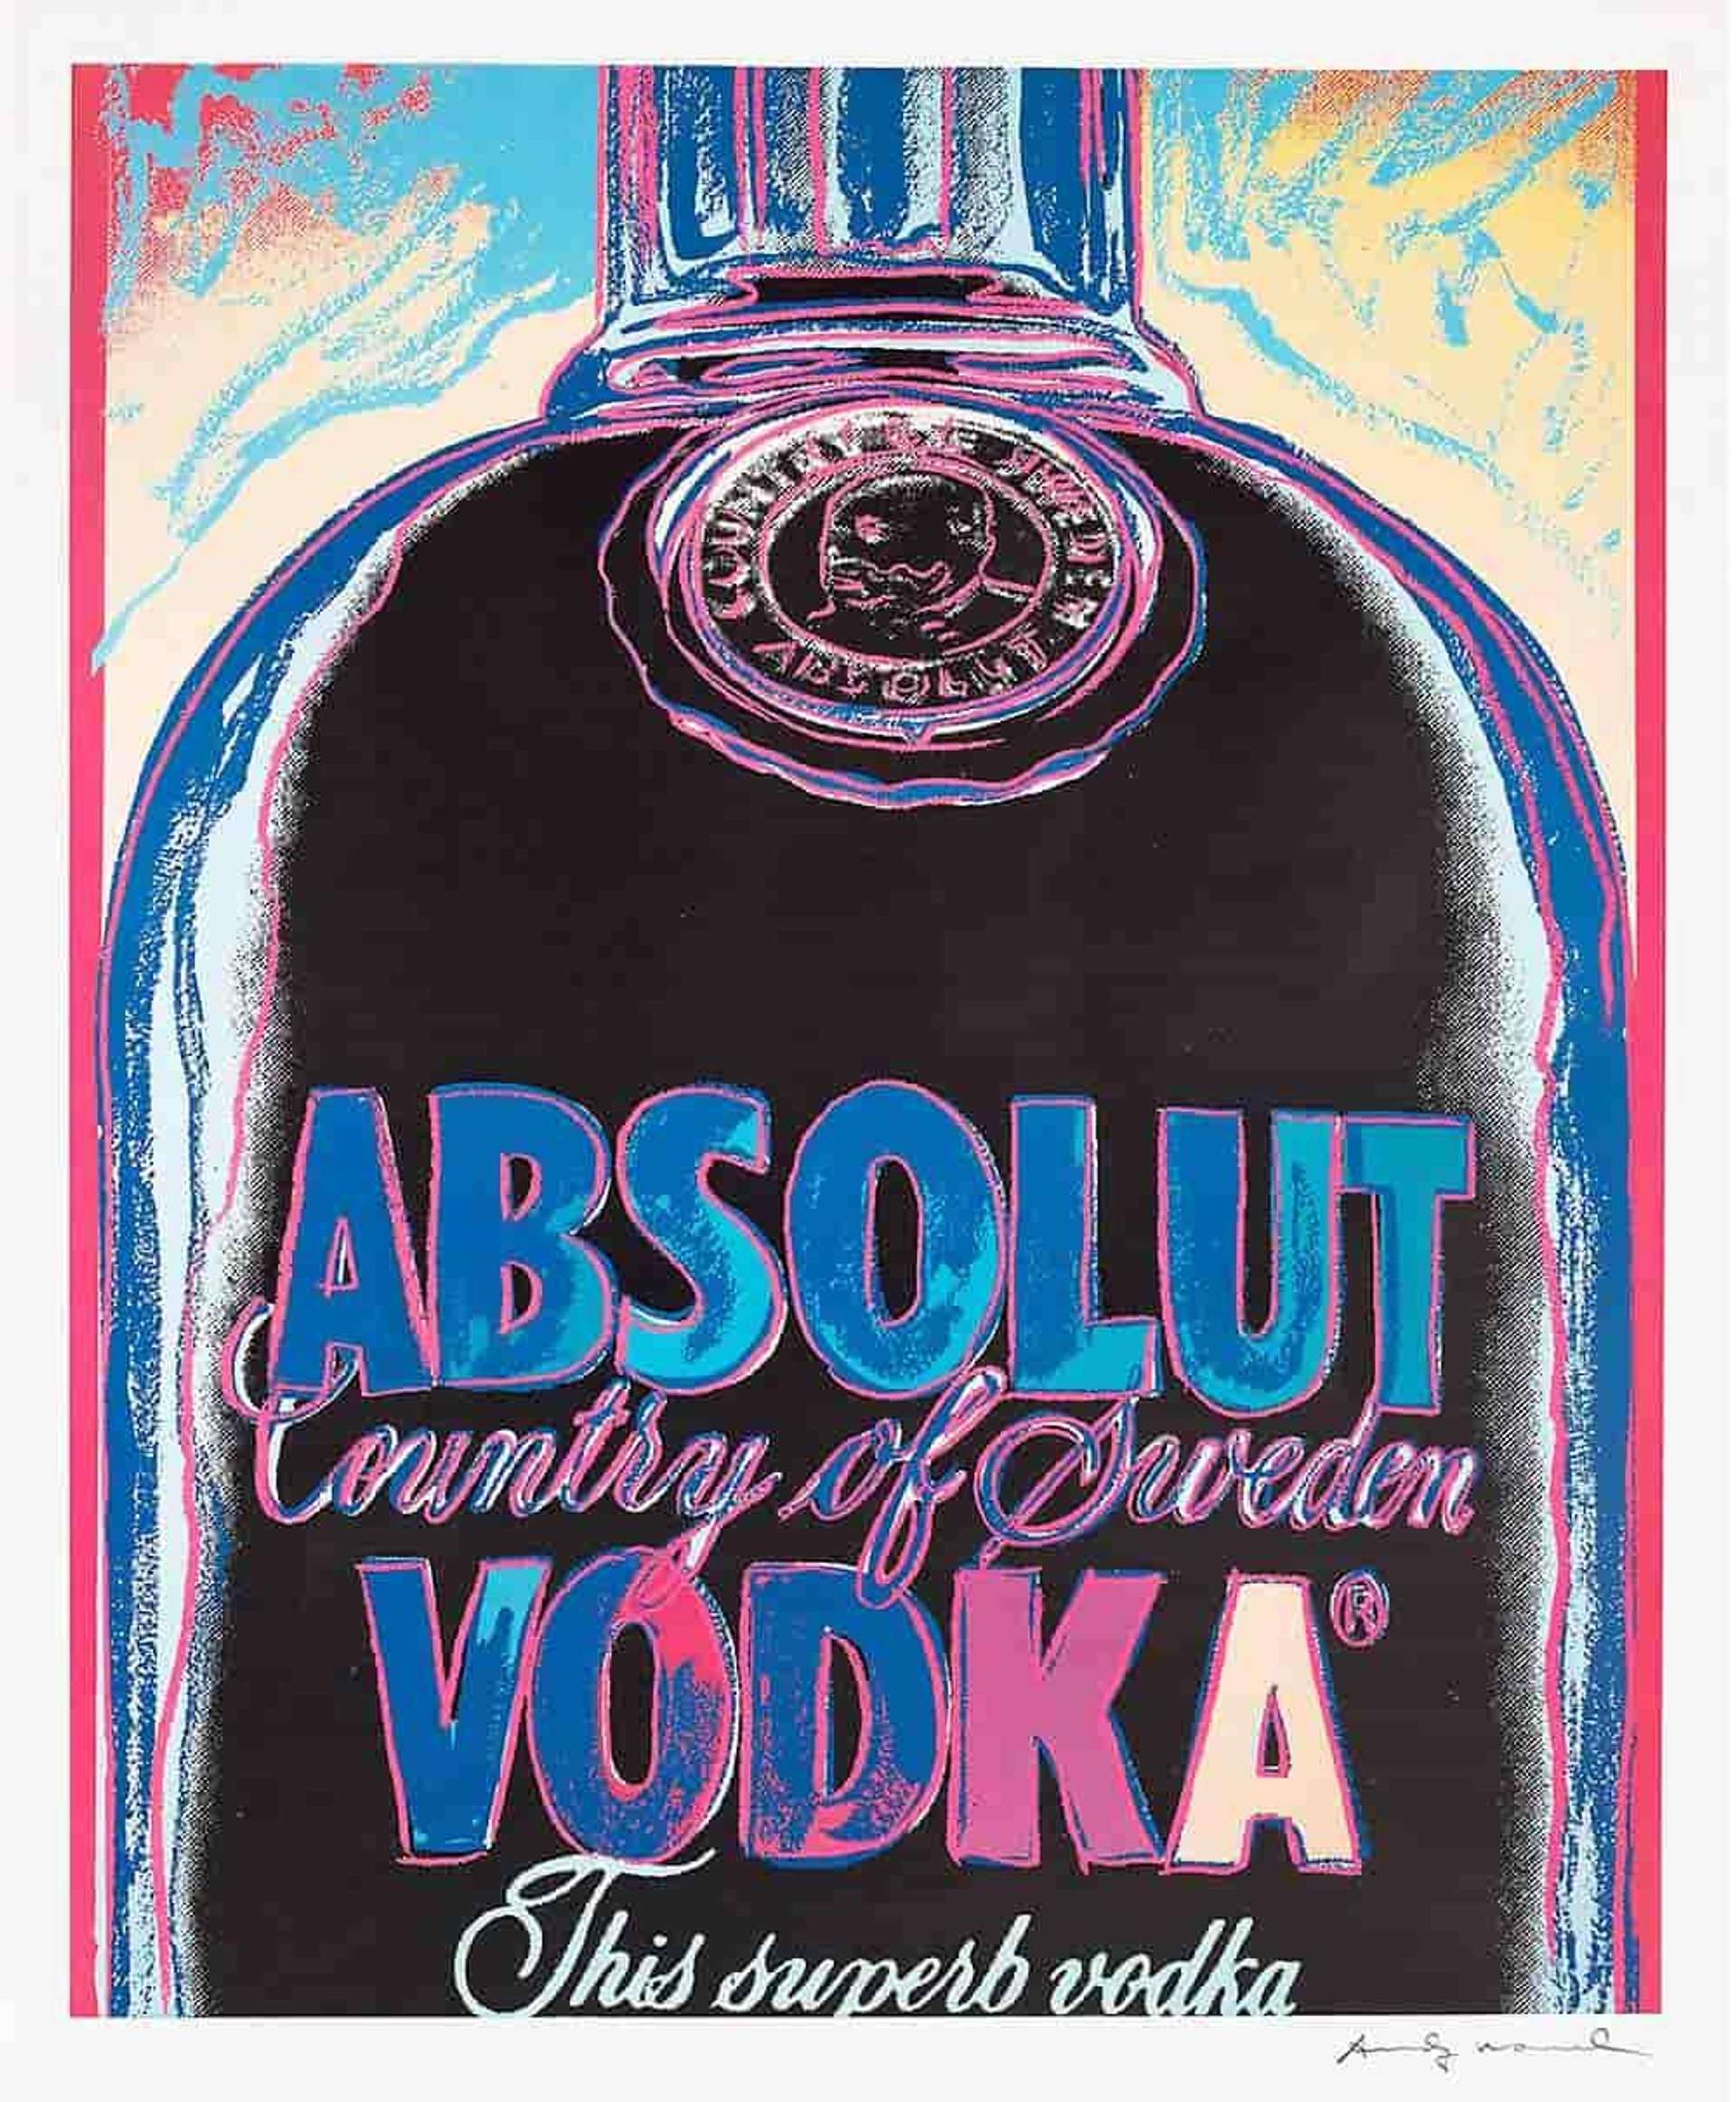 An image of a screenprint by Andy Warhol, showing a bottle of Absolut Vodka depicted in his signature bright colours.